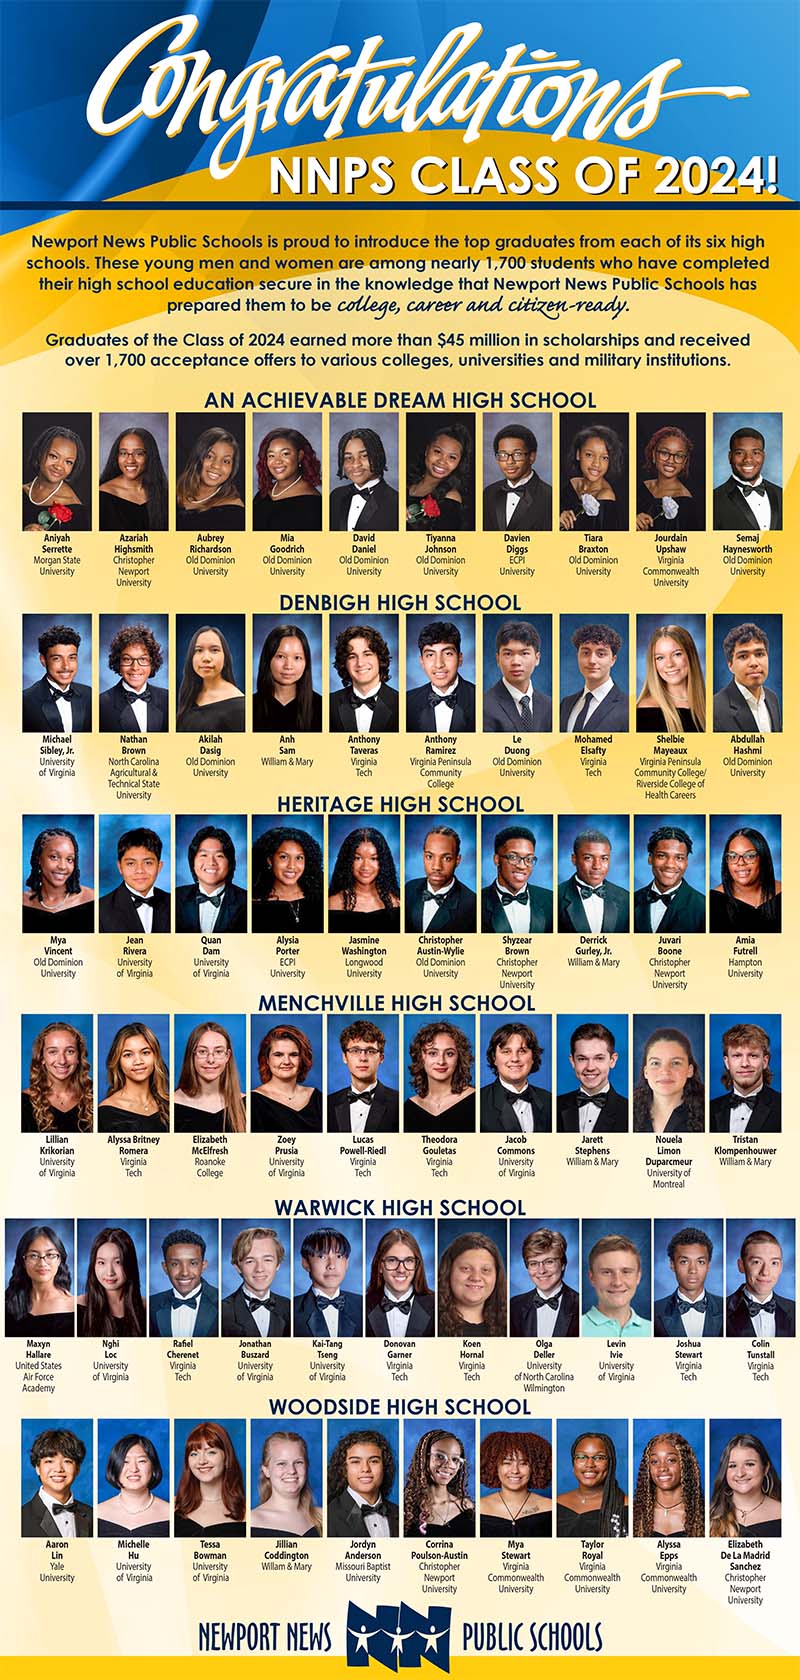 Click image to download pdf of NNPS Top 10 Grads 2024